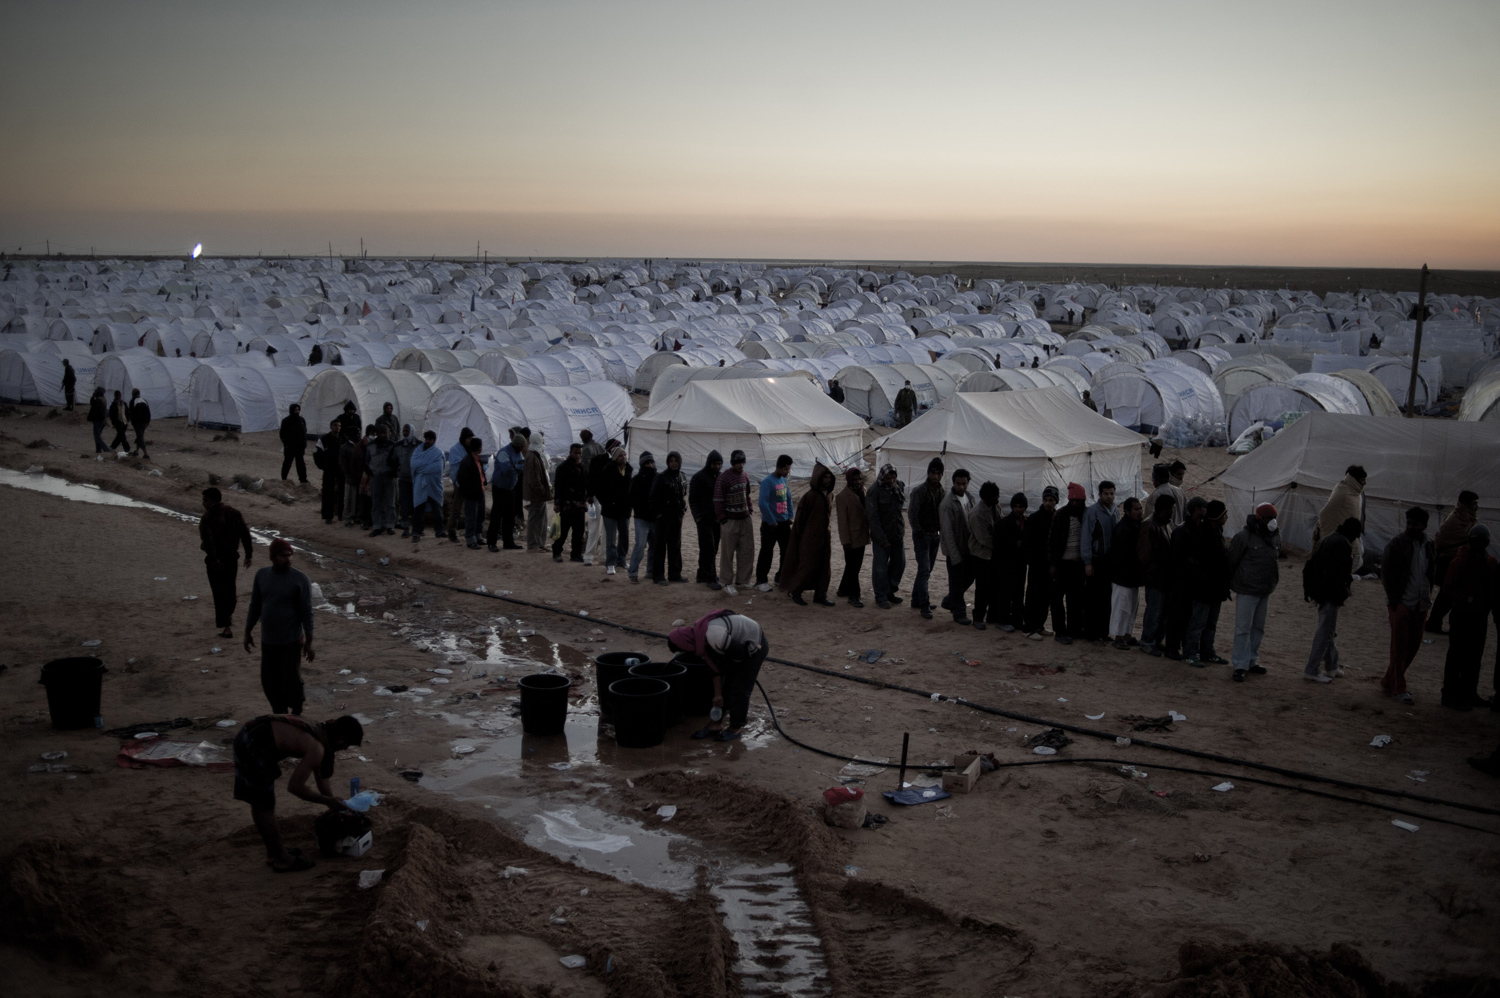 March 5, 2011. Men from Bangladesh, who used to work in Libya but recently fled due to unrest there, wash at a refugee camp after crossing the Tunisia-Libyan border.